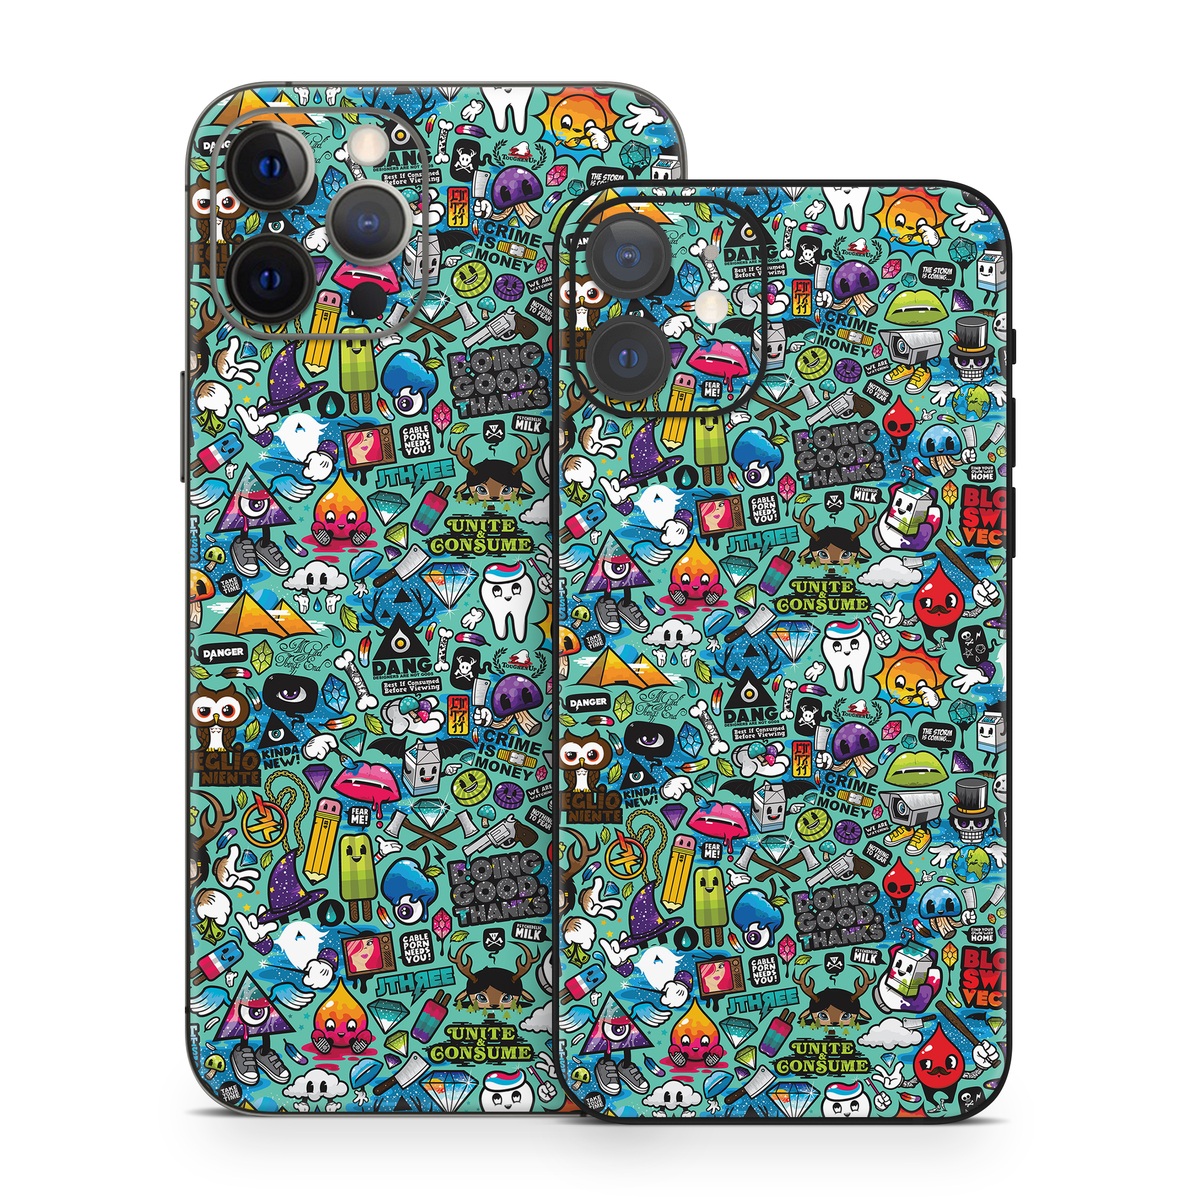 iPhone 12 Series Skin design of Cartoon, Art, Pattern, Design, Illustration, Visual arts, Doodle, Psychedelic art, with black, blue, gray, red, green colors